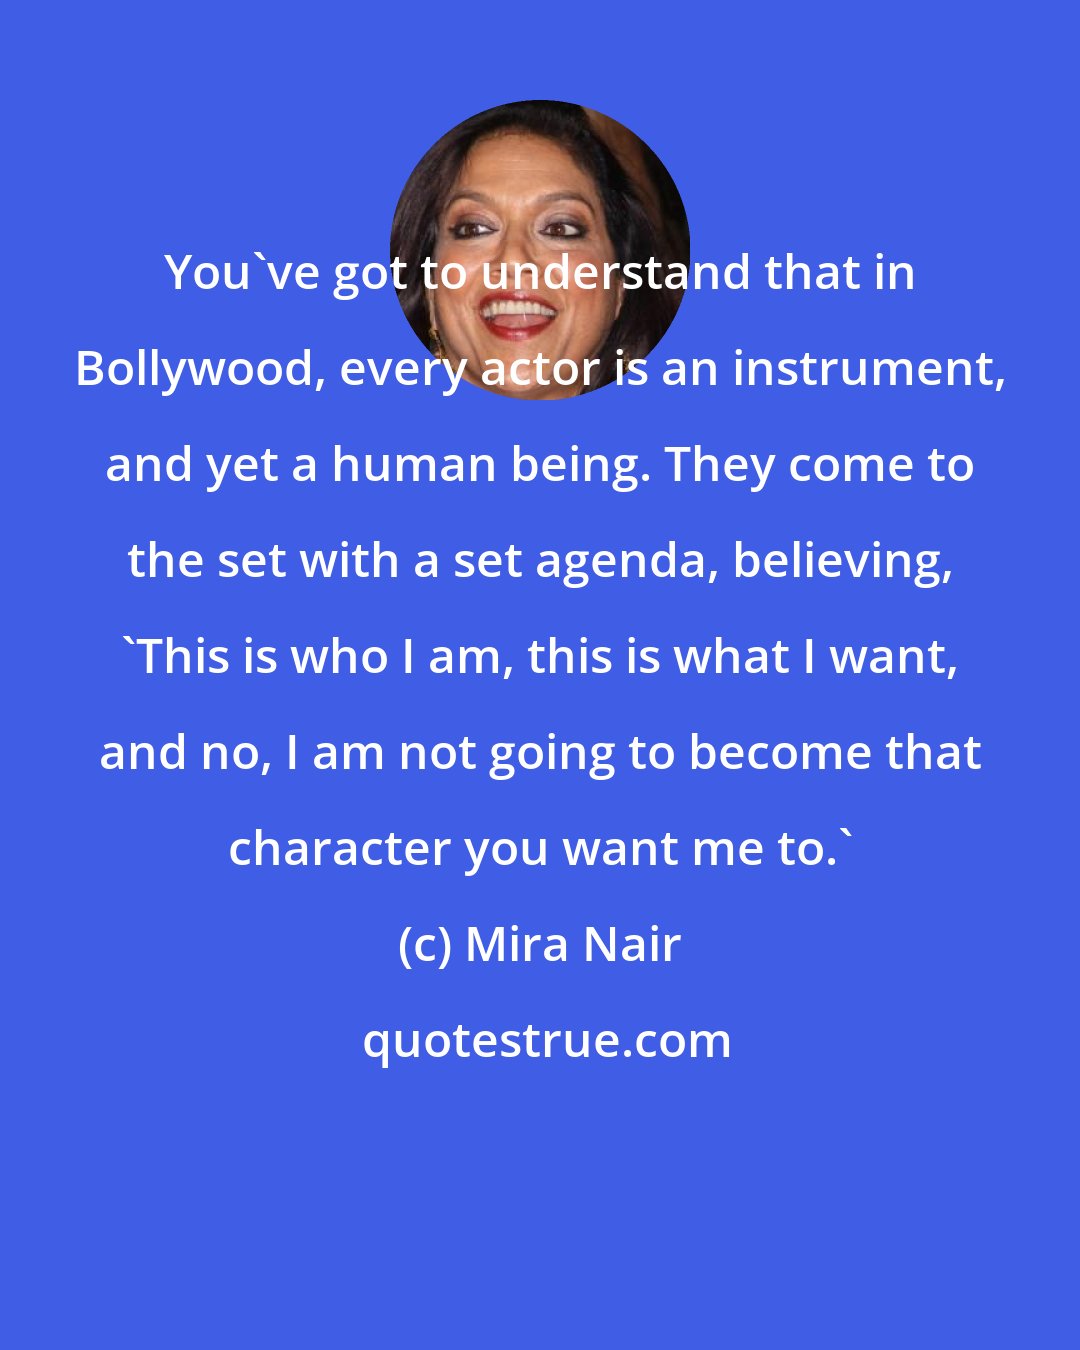 Mira Nair: You've got to understand that in Bollywood, every actor is an instrument, and yet a human being. They come to the set with a set agenda, believing, 'This is who I am, this is what I want, and no, I am not going to become that character you want me to.'